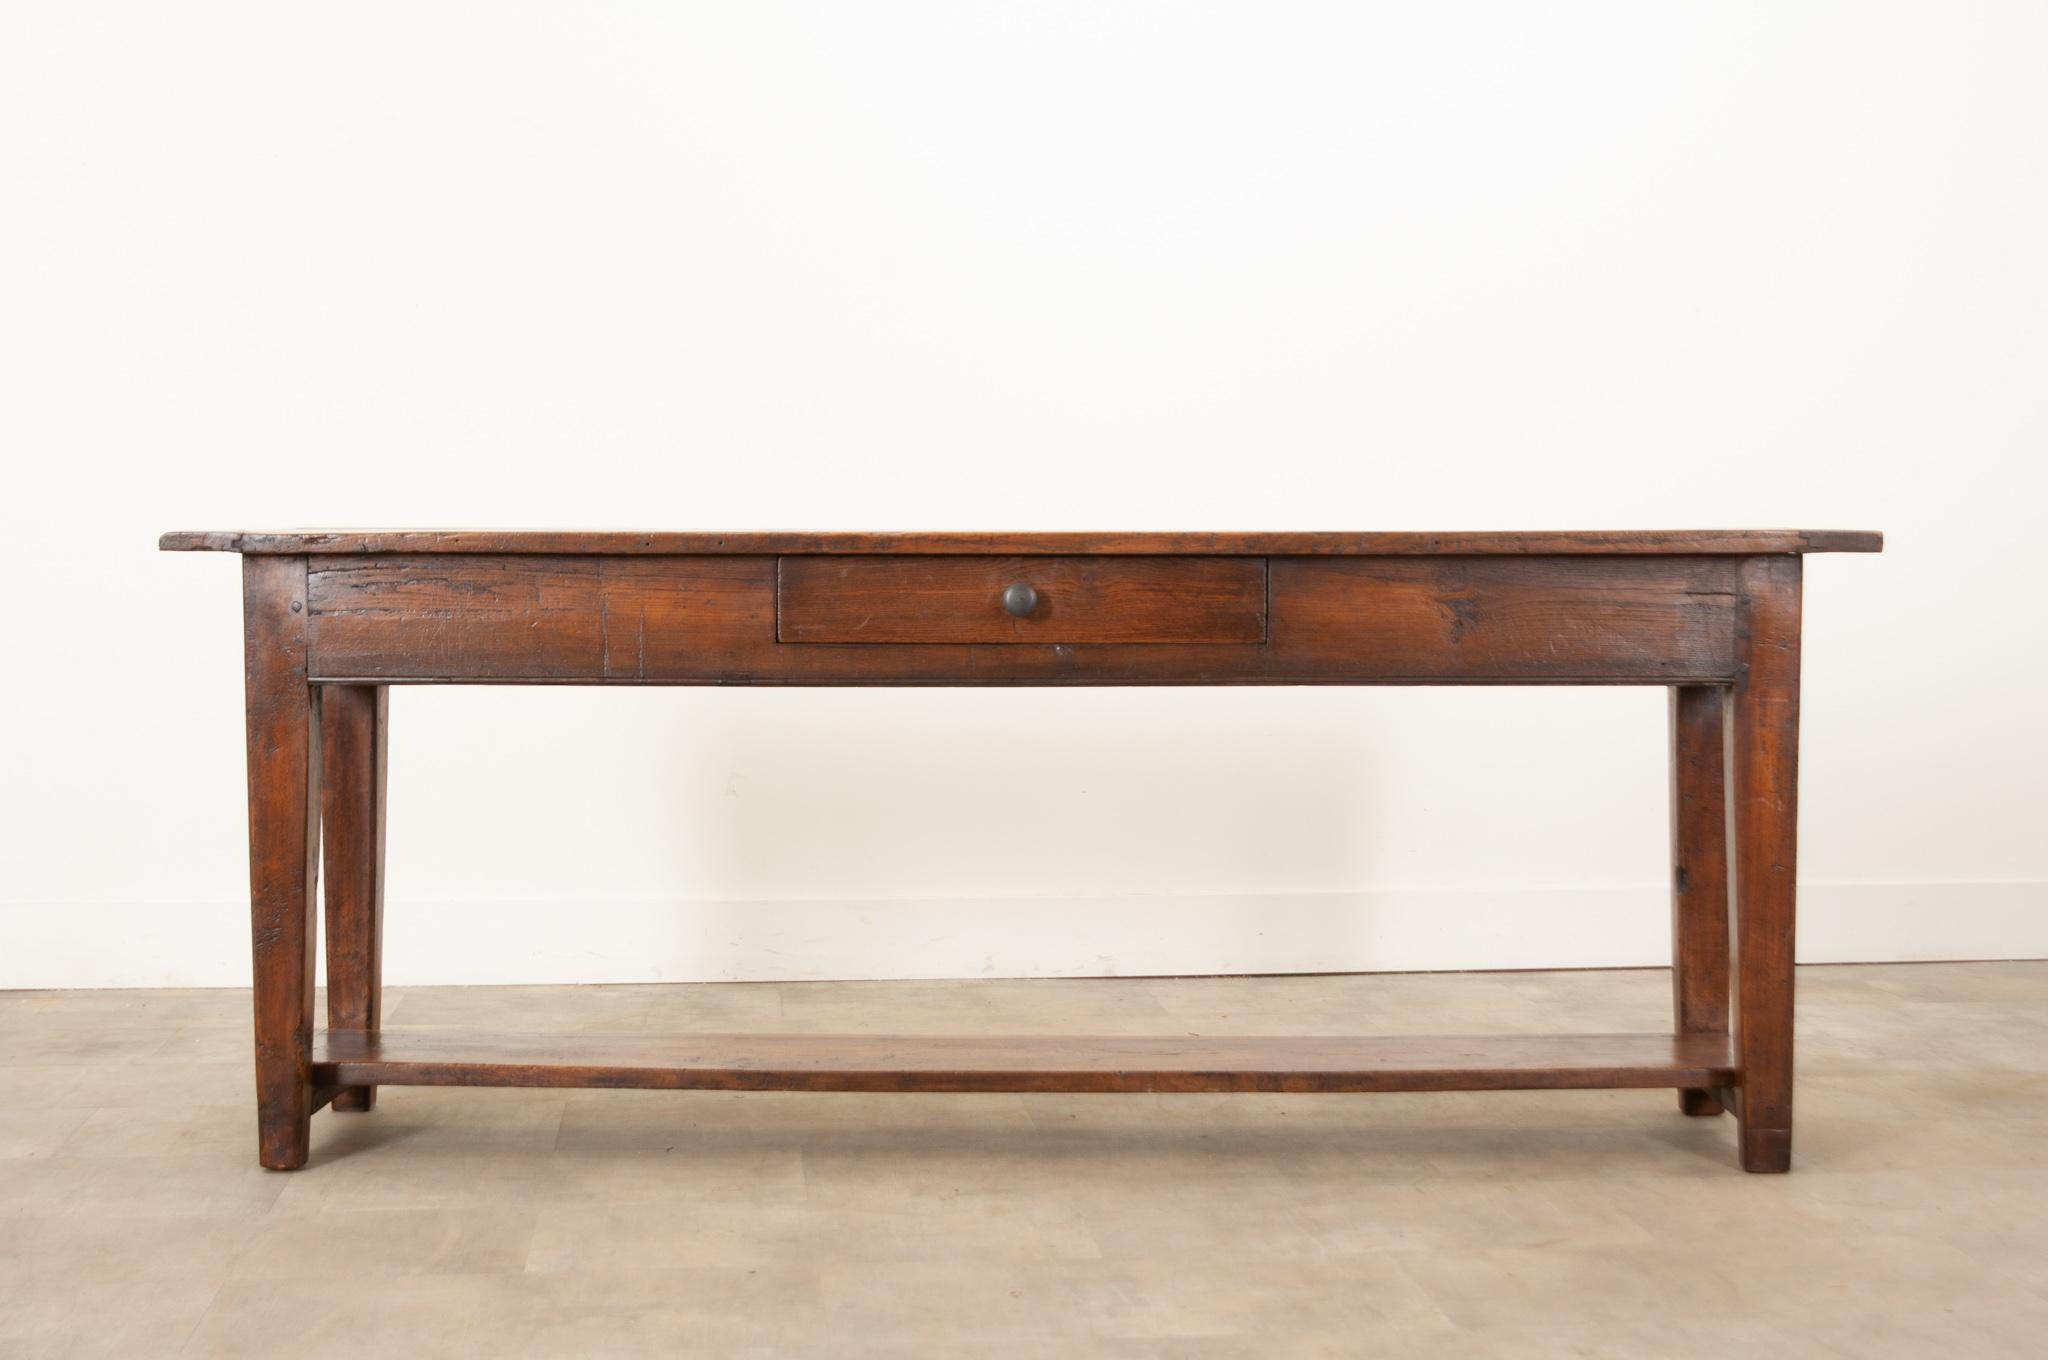 A handsome solid oak server handcrafted in France, circa 1850. This console table was made using peg joinery, which accounts for its sturdiness and robust stability. It has a sleek apron which houses a single, wide drawer, accessed by a simply